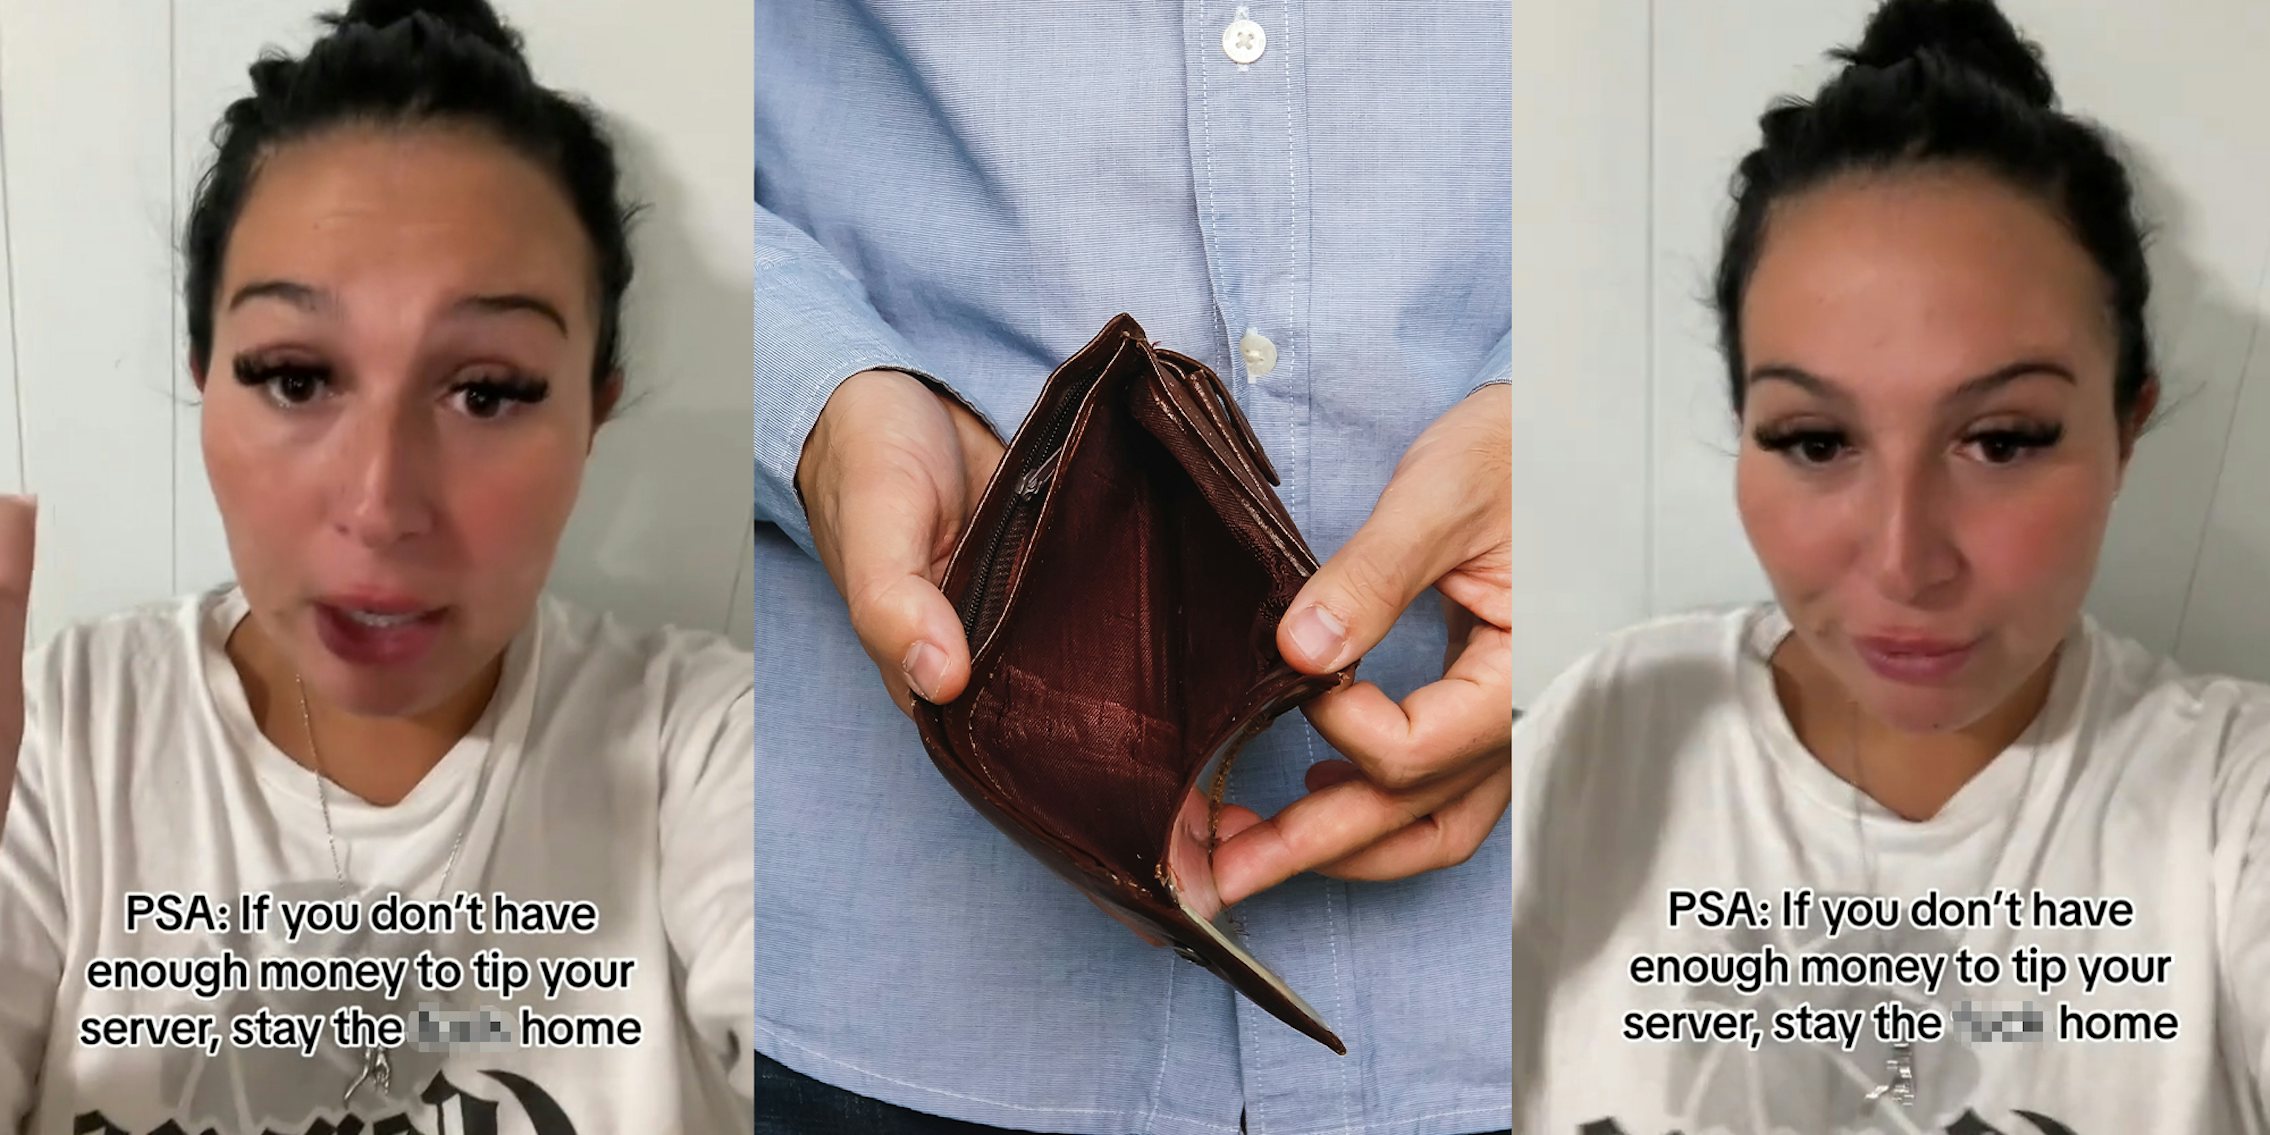 Woman says 'if you dont have money to tip your server stay home'; Man Holding up empty wallet